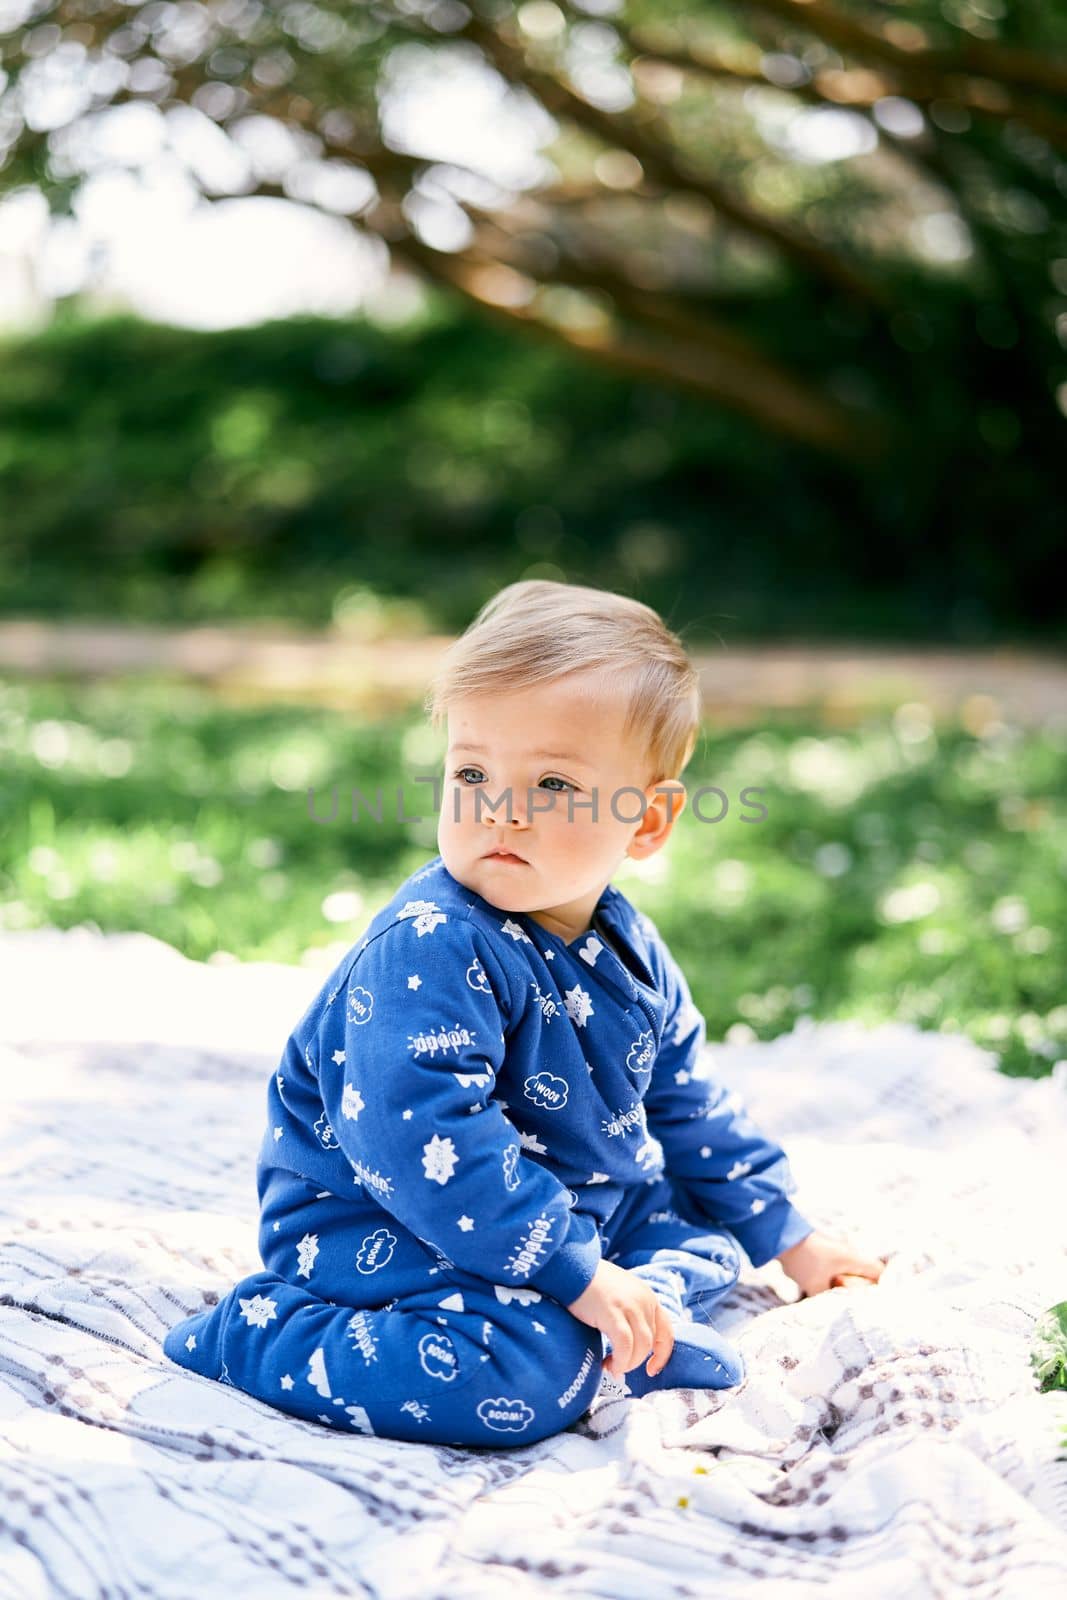 Small child in a blue overalls sits on his knees with his head turned on a checkered blanket on a green lawn. High quality photo